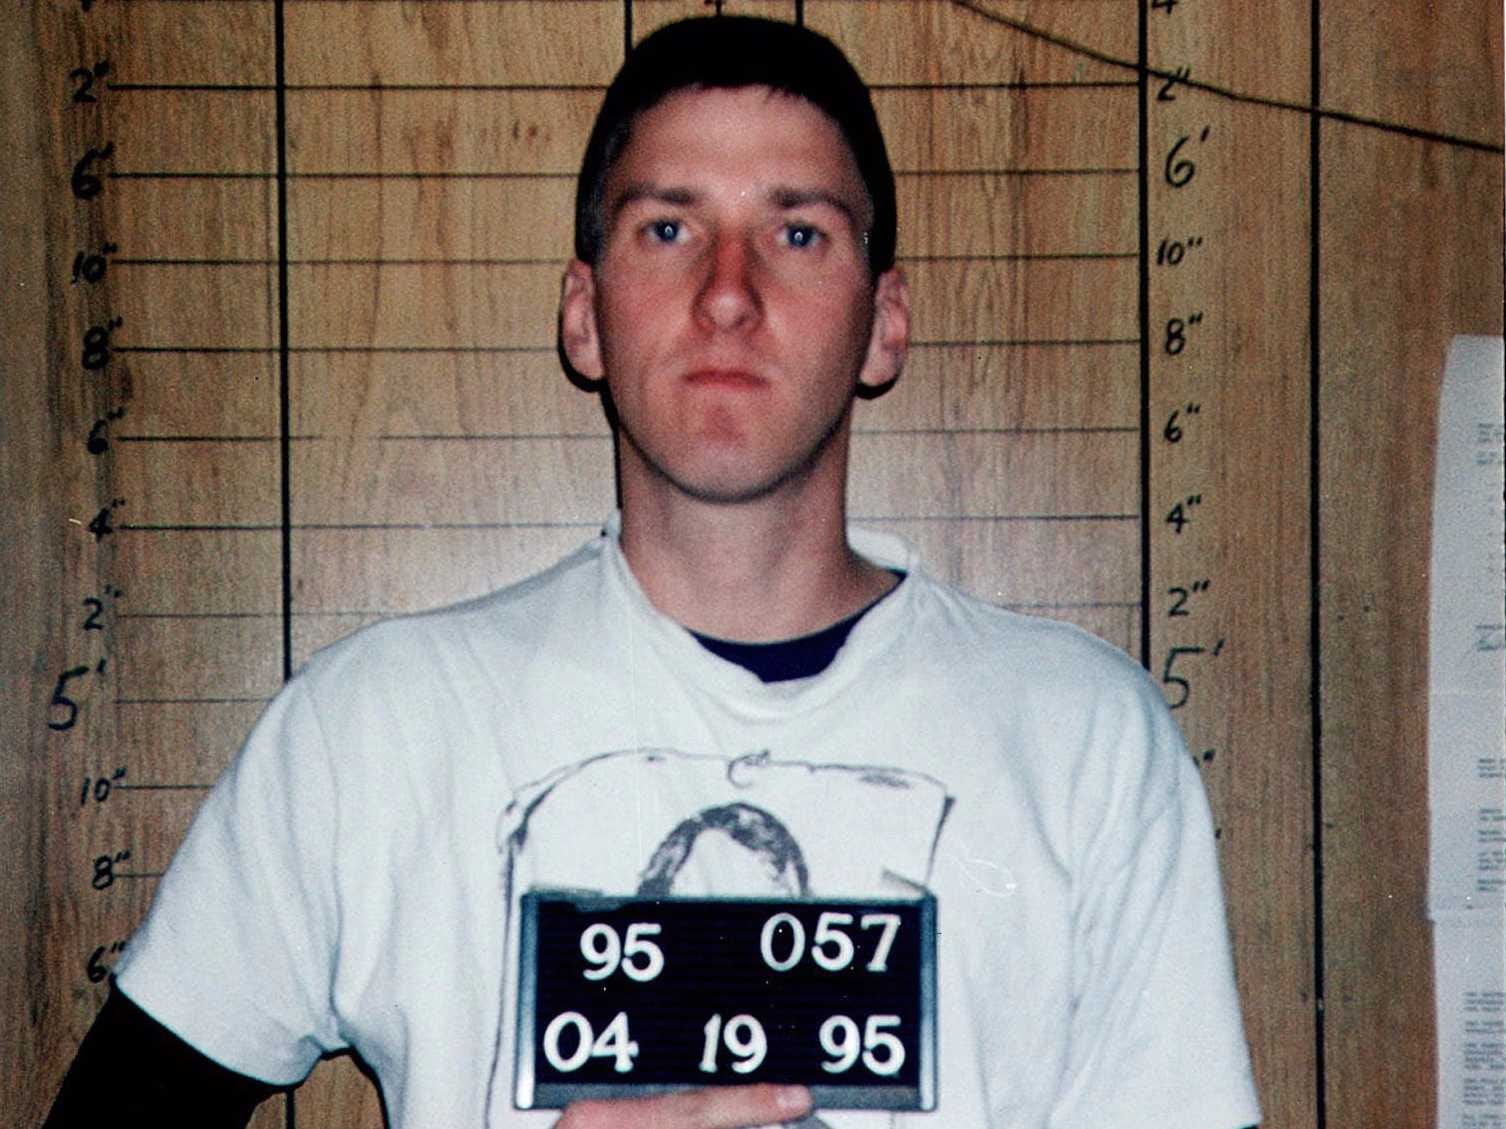 20-years-after-the-oklahoma-city-bombing-timothy-mcveigh-remains-the-only-terrorist-executed-by-us.jpg